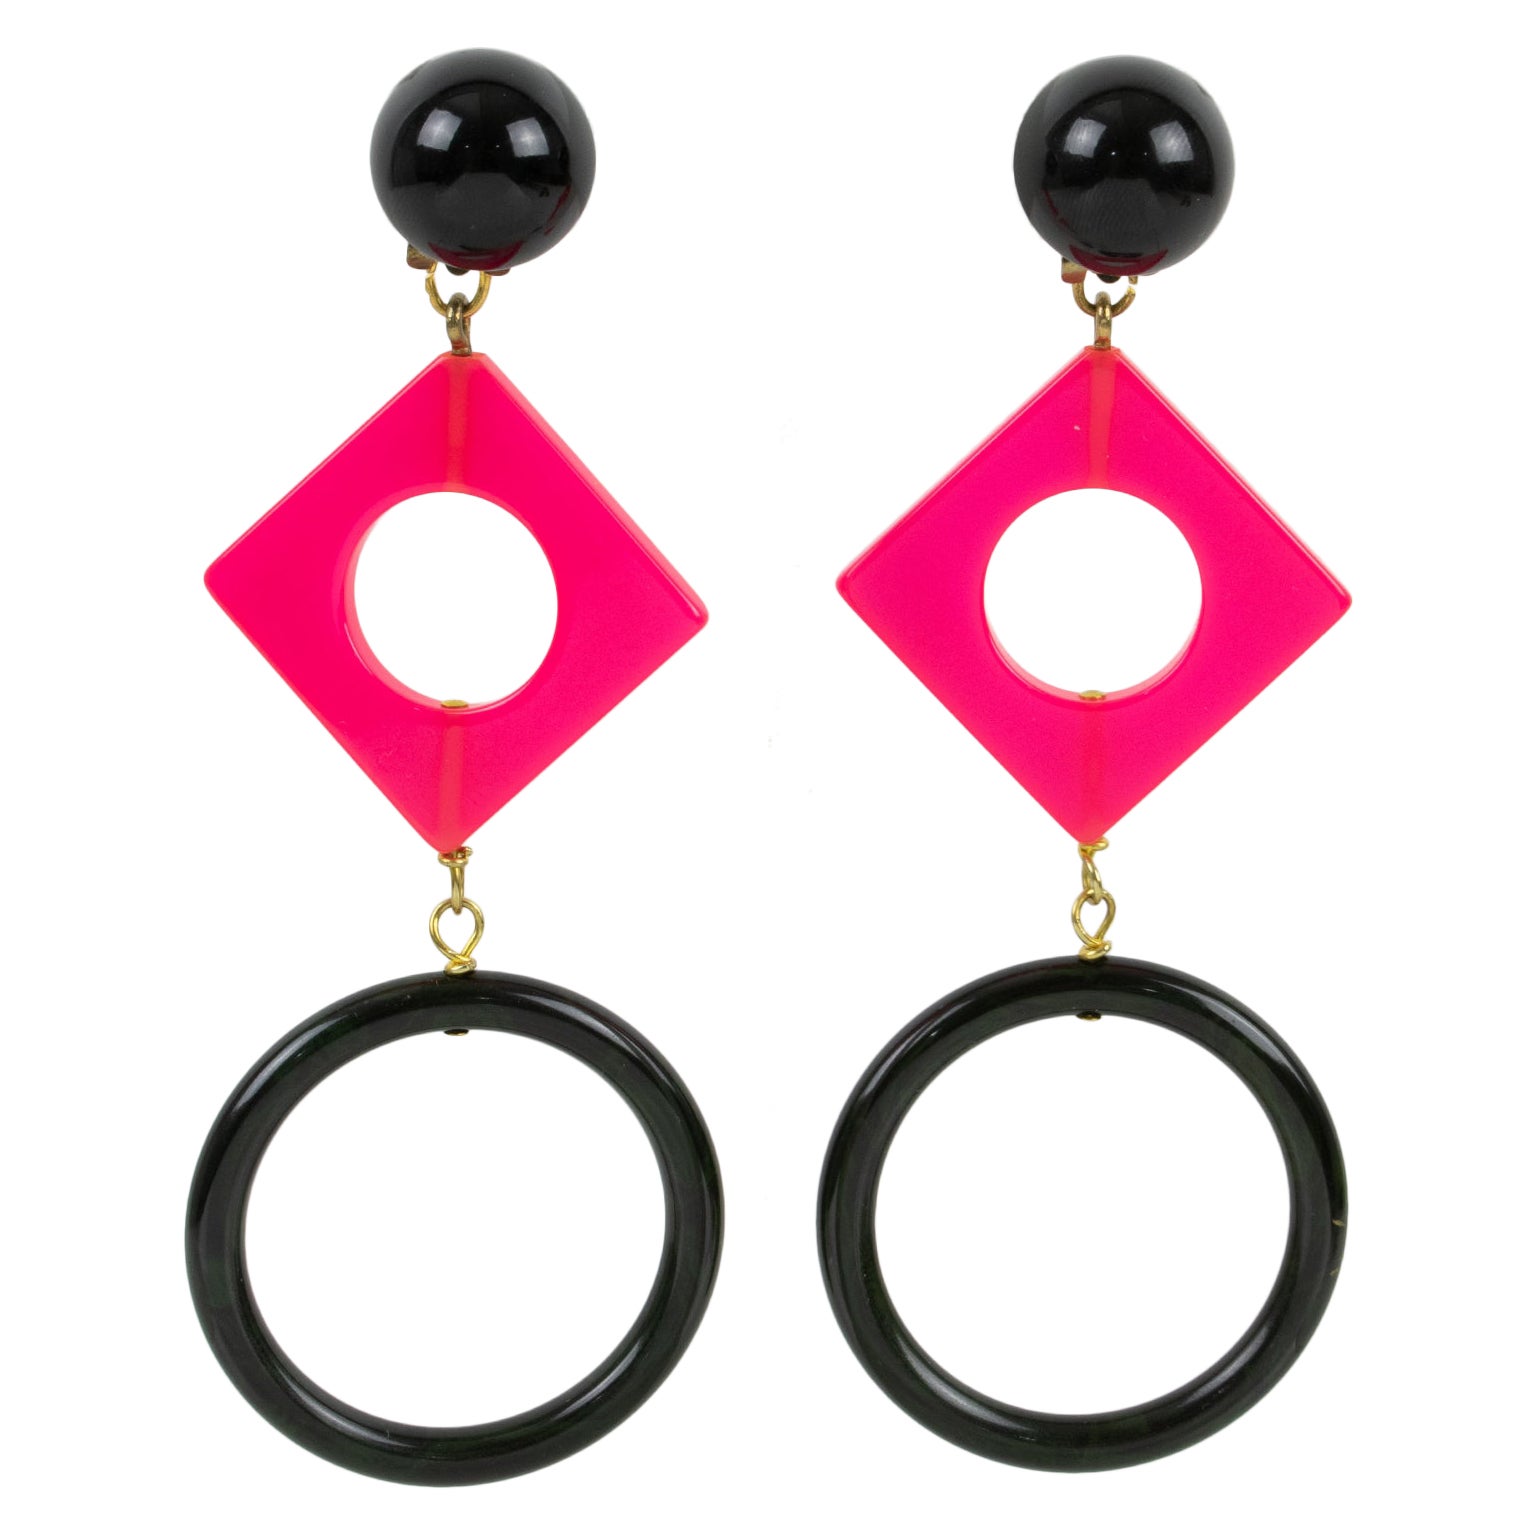 Bakelite Dangle Clip Earrings Black and Hot Pink Colors Pop Art Style For Sale